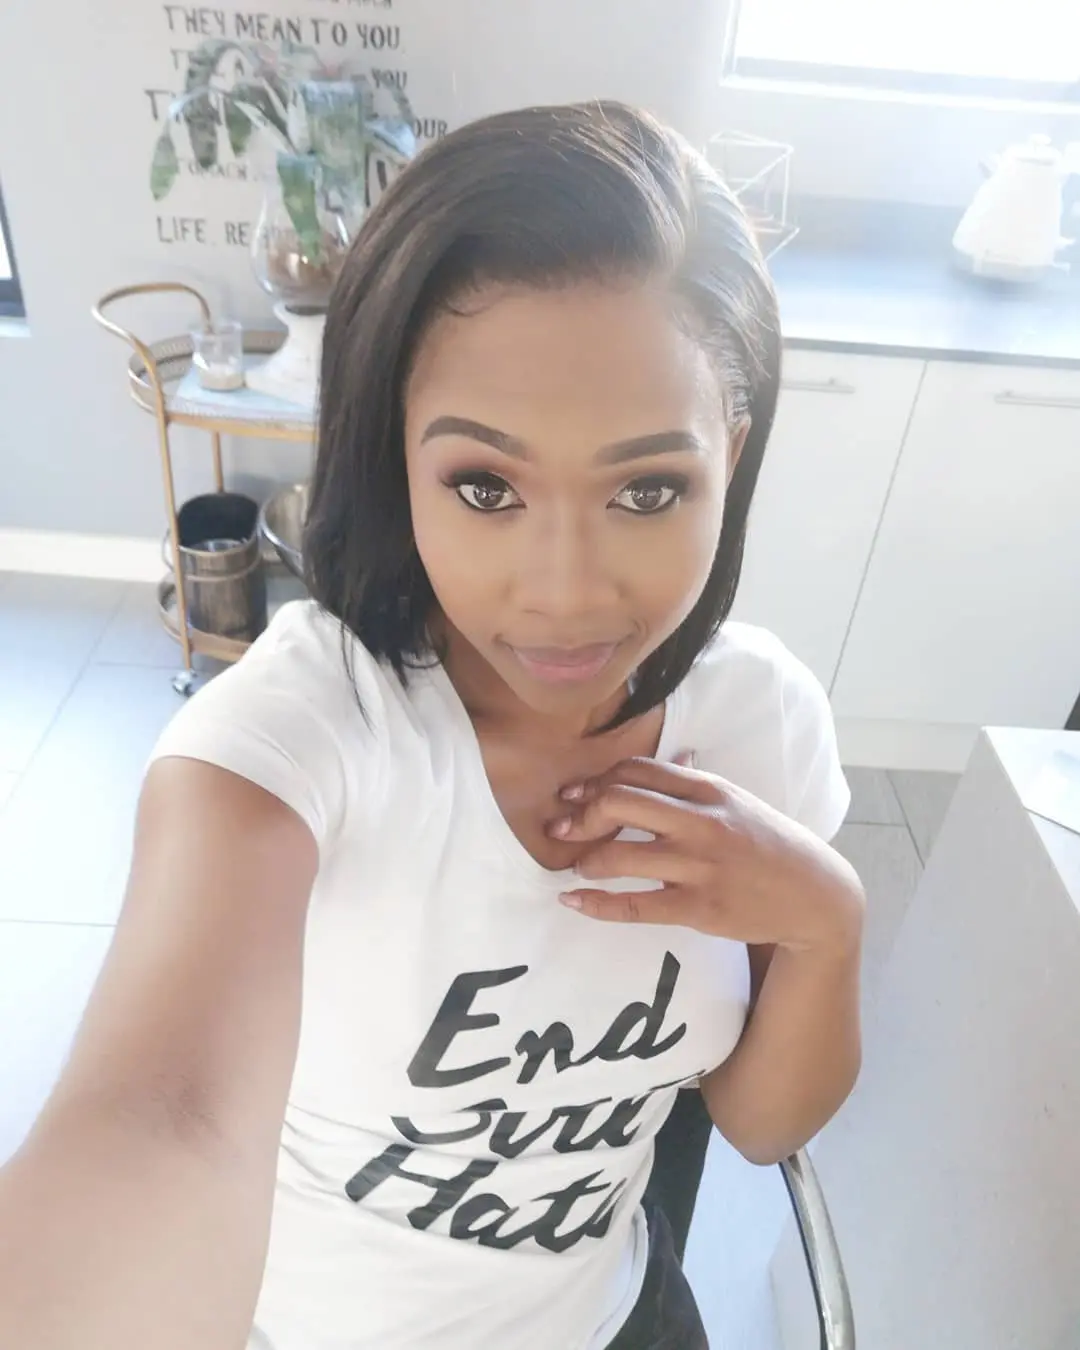 Dineo Ranaka thanks Mzansi for supporting her podcast